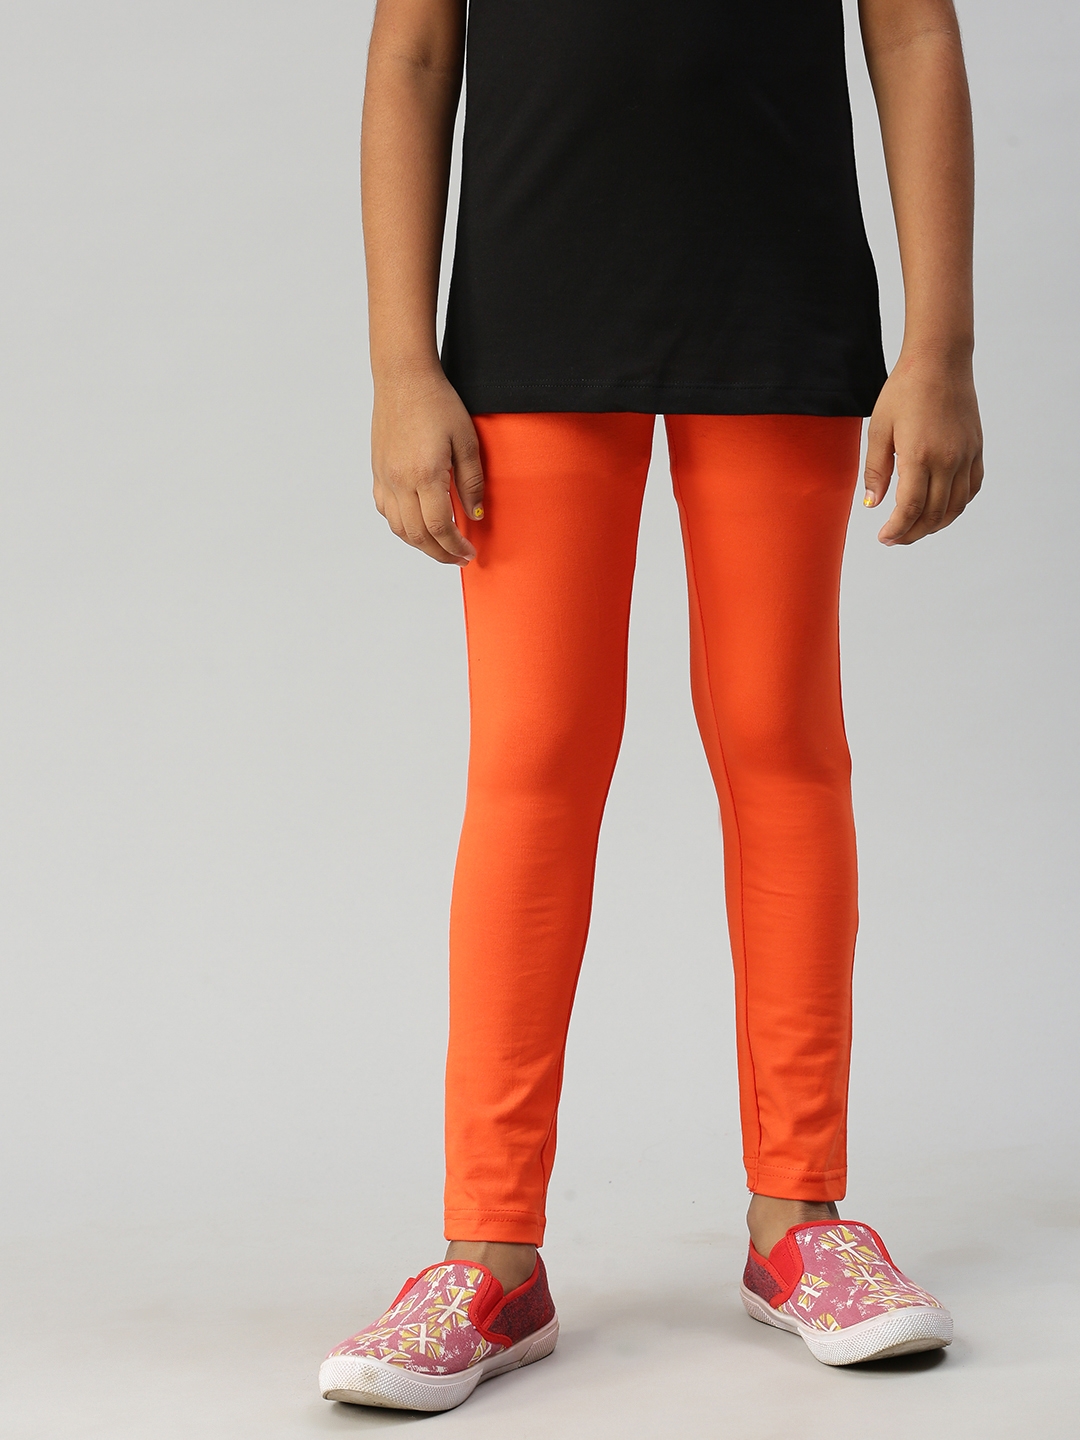 Kryptic | Kryptic Girls casual  Cotton stretch legging Pack of 2 2